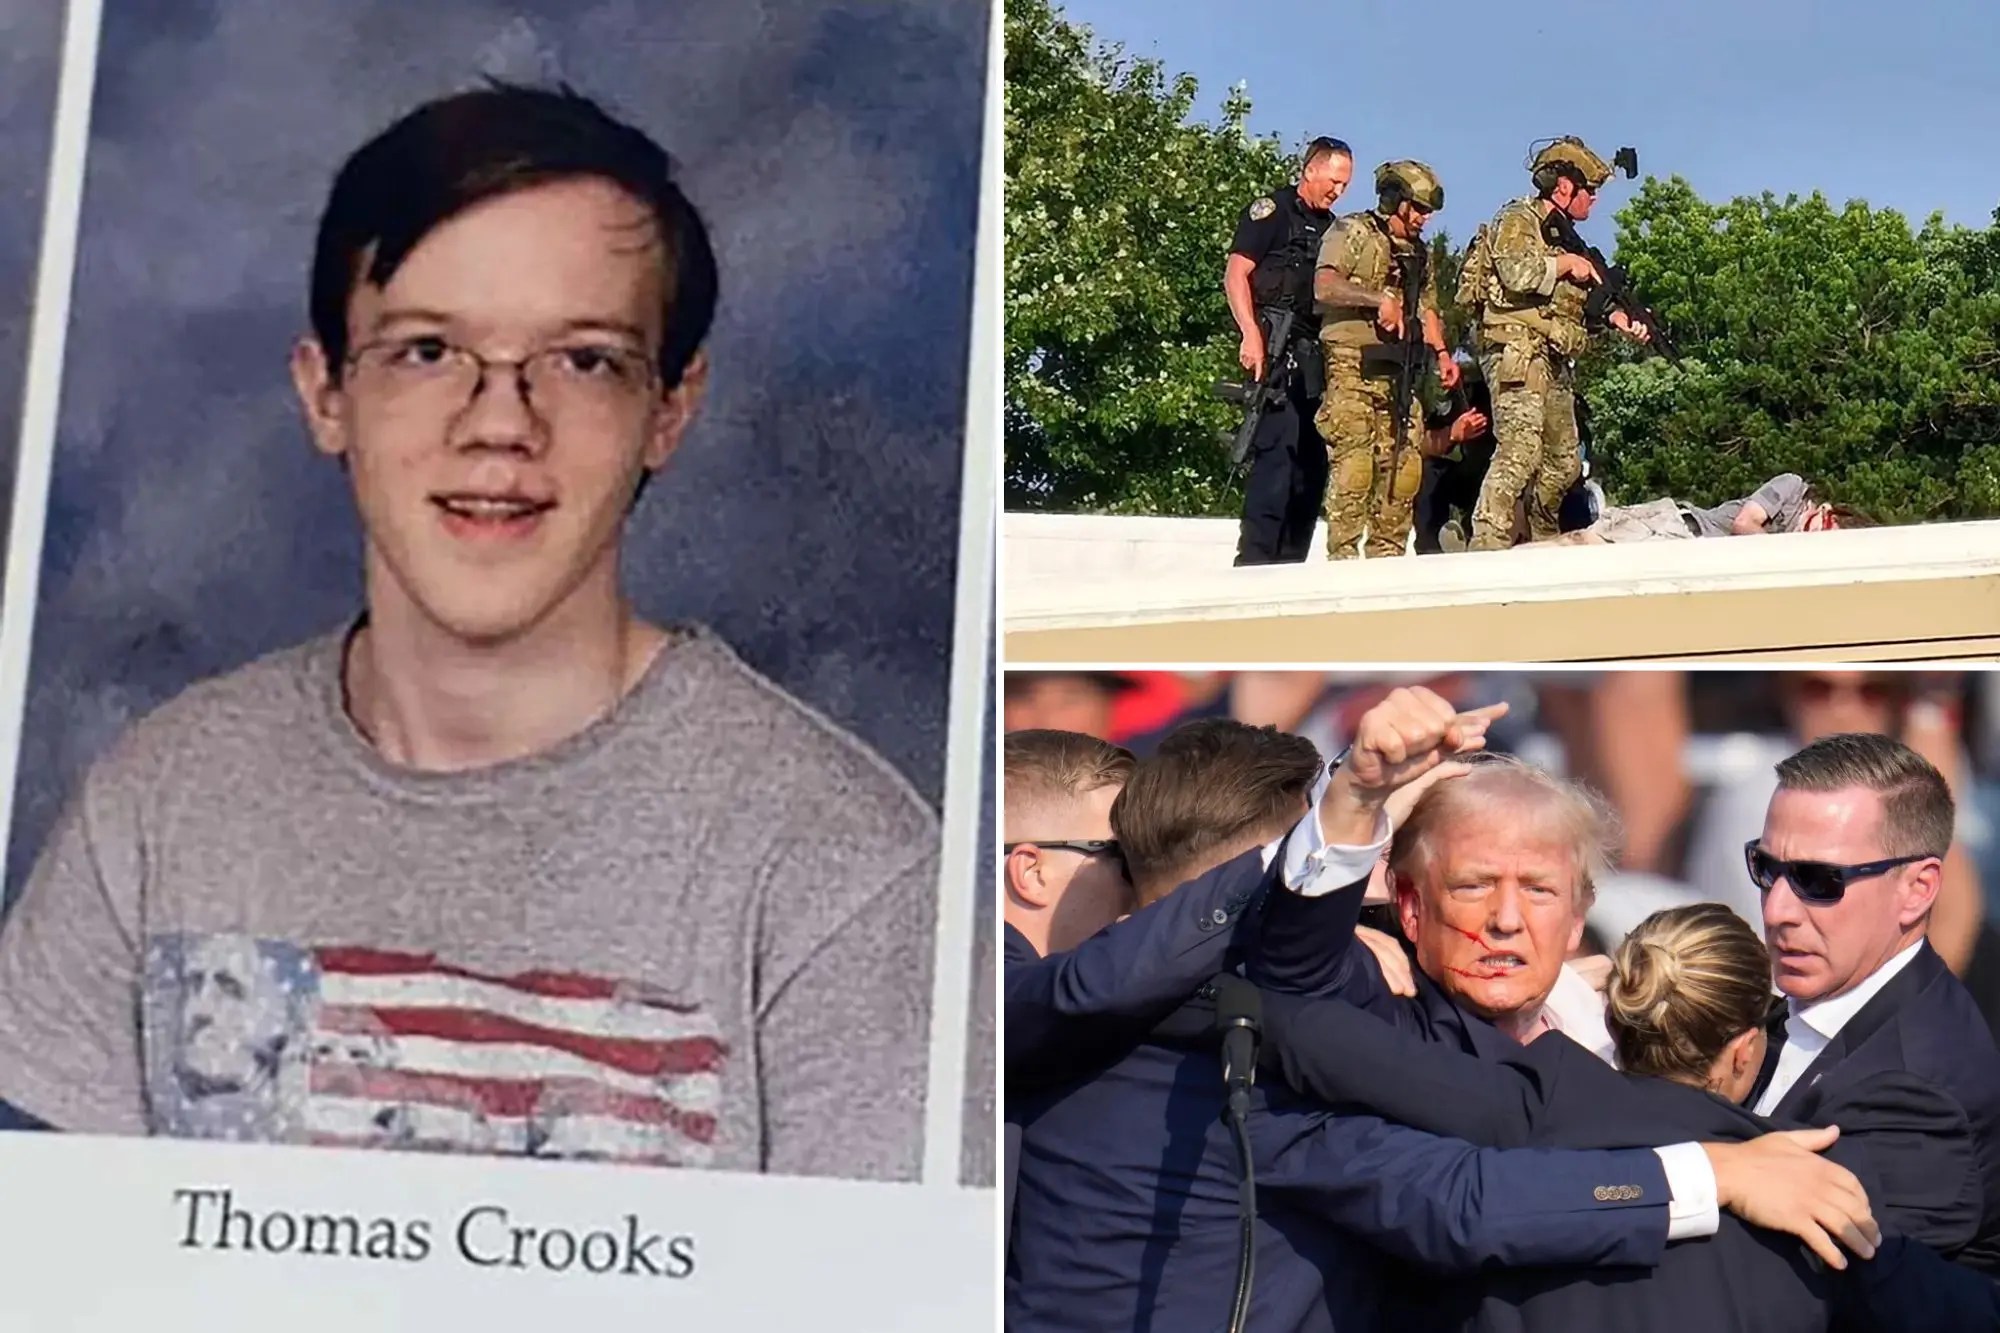 Five (5) things to know about 20-year-old Thomas Matthew Crooks who shot Donald Trump at Pennsylvania rally